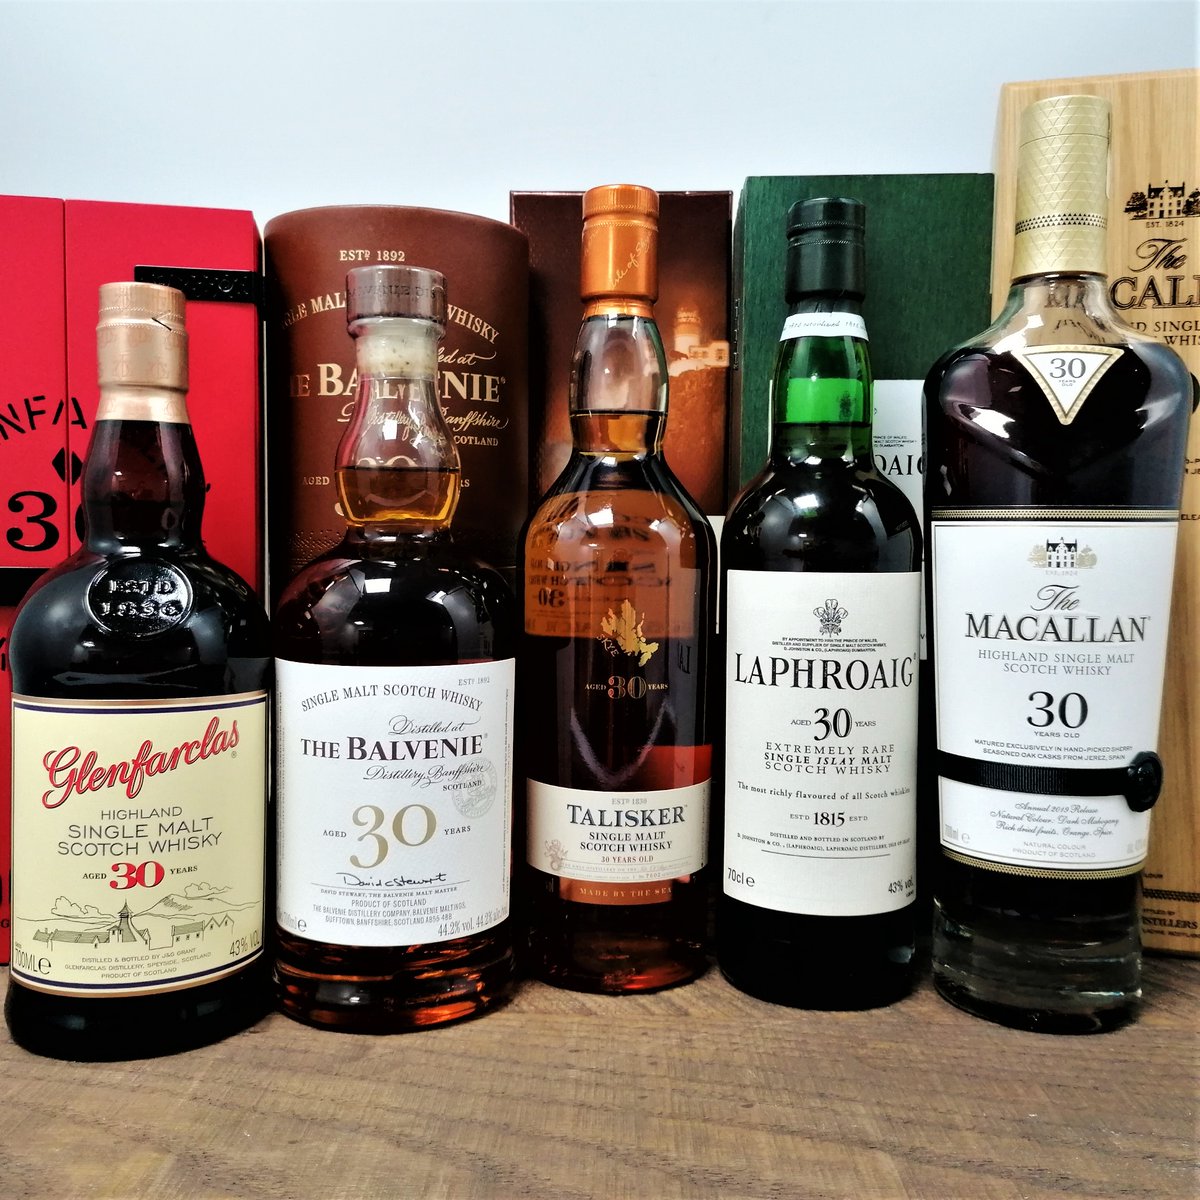 More than 30 whiskies over 30 Years Old in our live #whiskyauction! Including #Glenfarclas #Balvenie #Talisker #Laphroaig & #Macallan! Auction Ends Tuesday 18 January.
https://t.co/yRV6rgW14X https://t.co/AfjF9htMIn